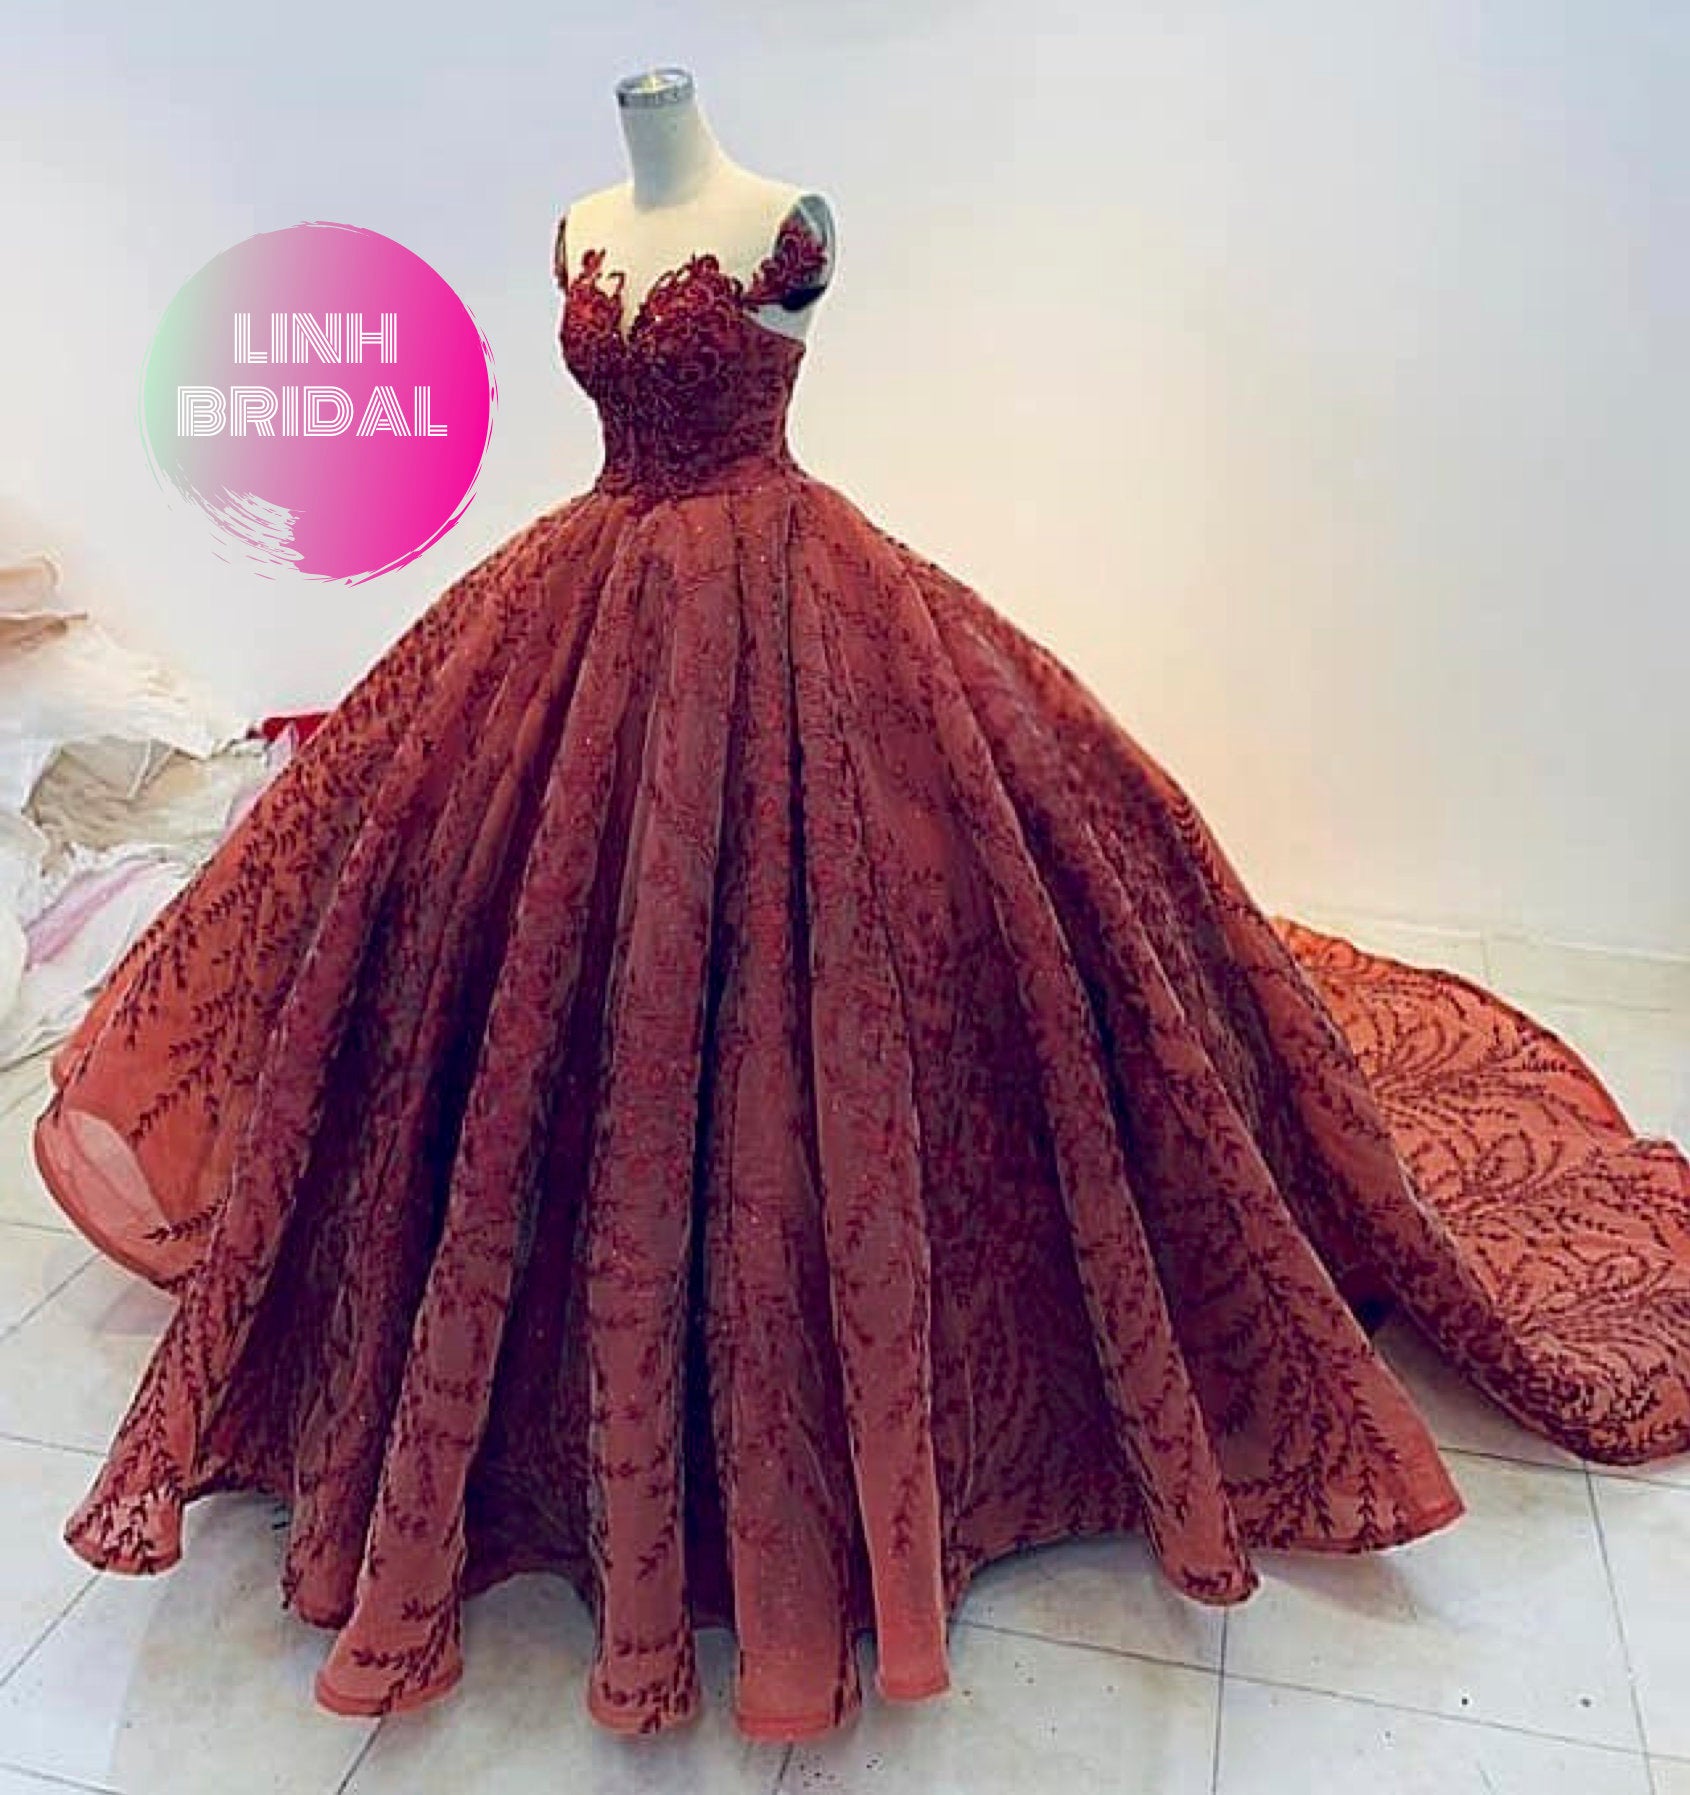 maroon gown for wedding